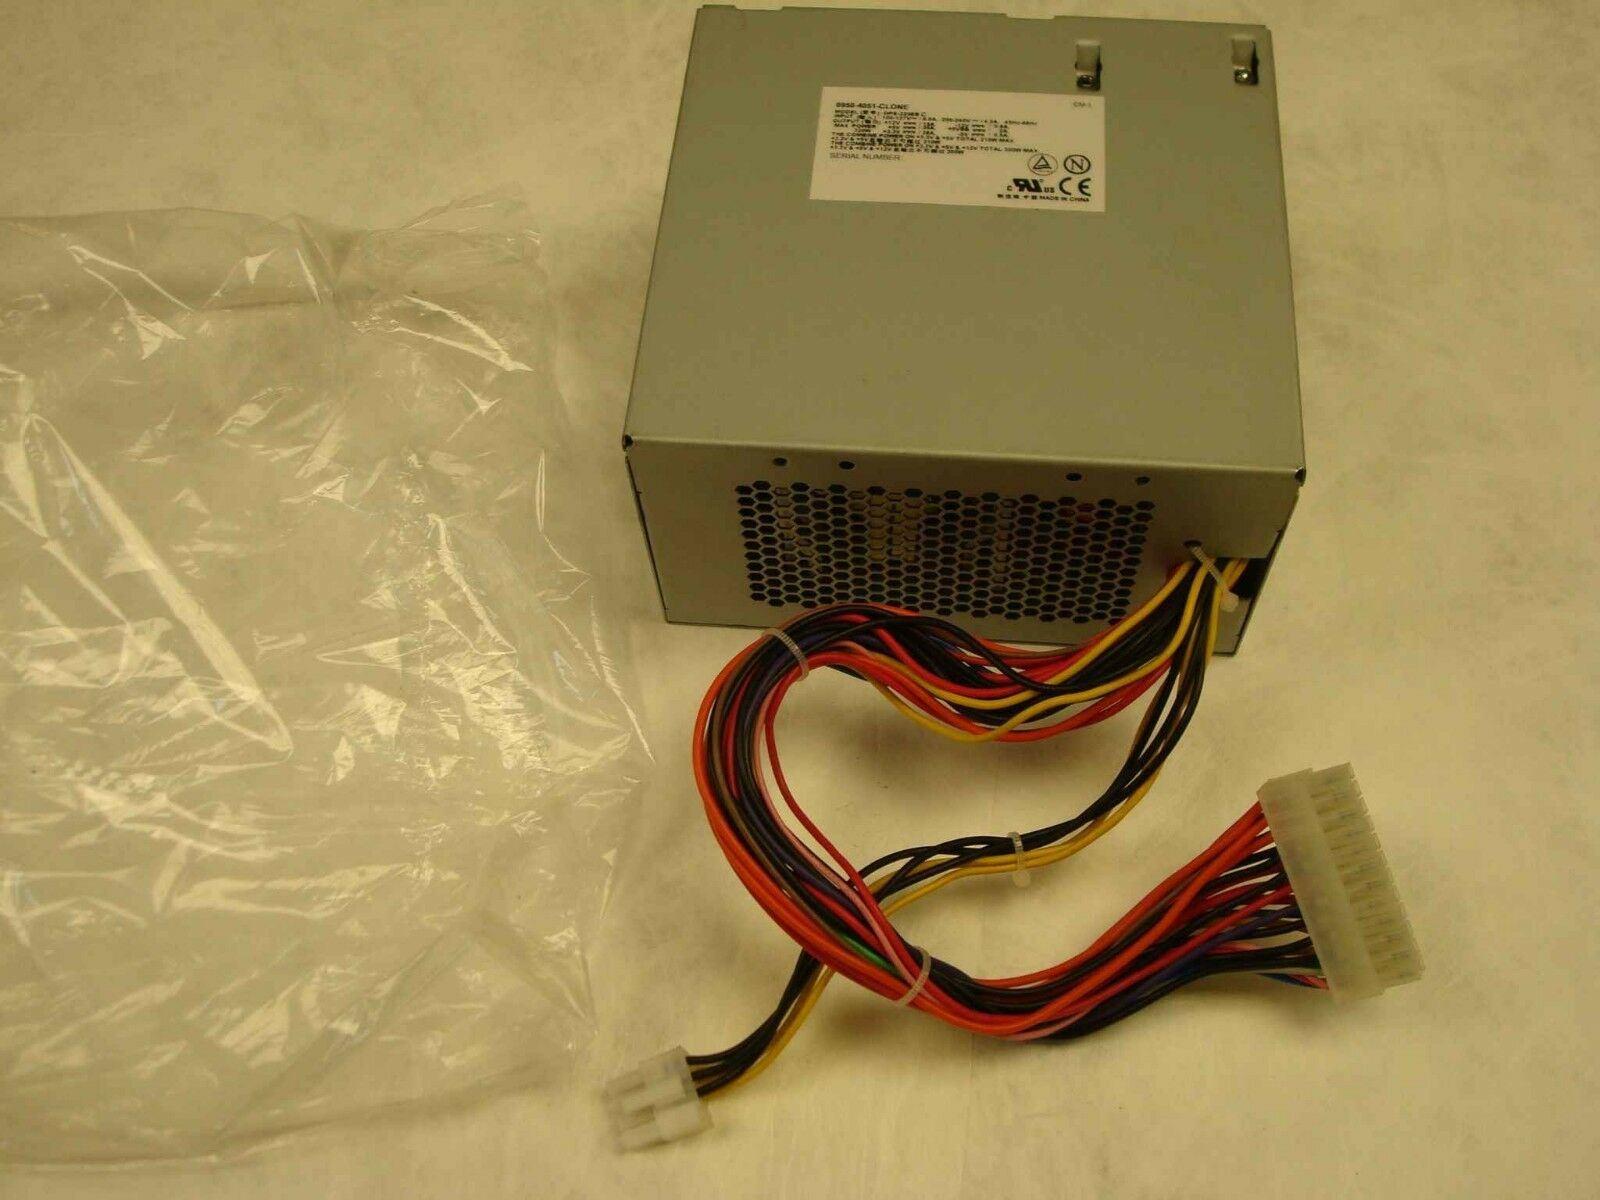 DPS 320EB 0950 4051 3P 0950 4051 ac power supply assembly 320w with fan 88v to 269v ac 47hz to 66hz input mounts in the rear right corner of the chassis